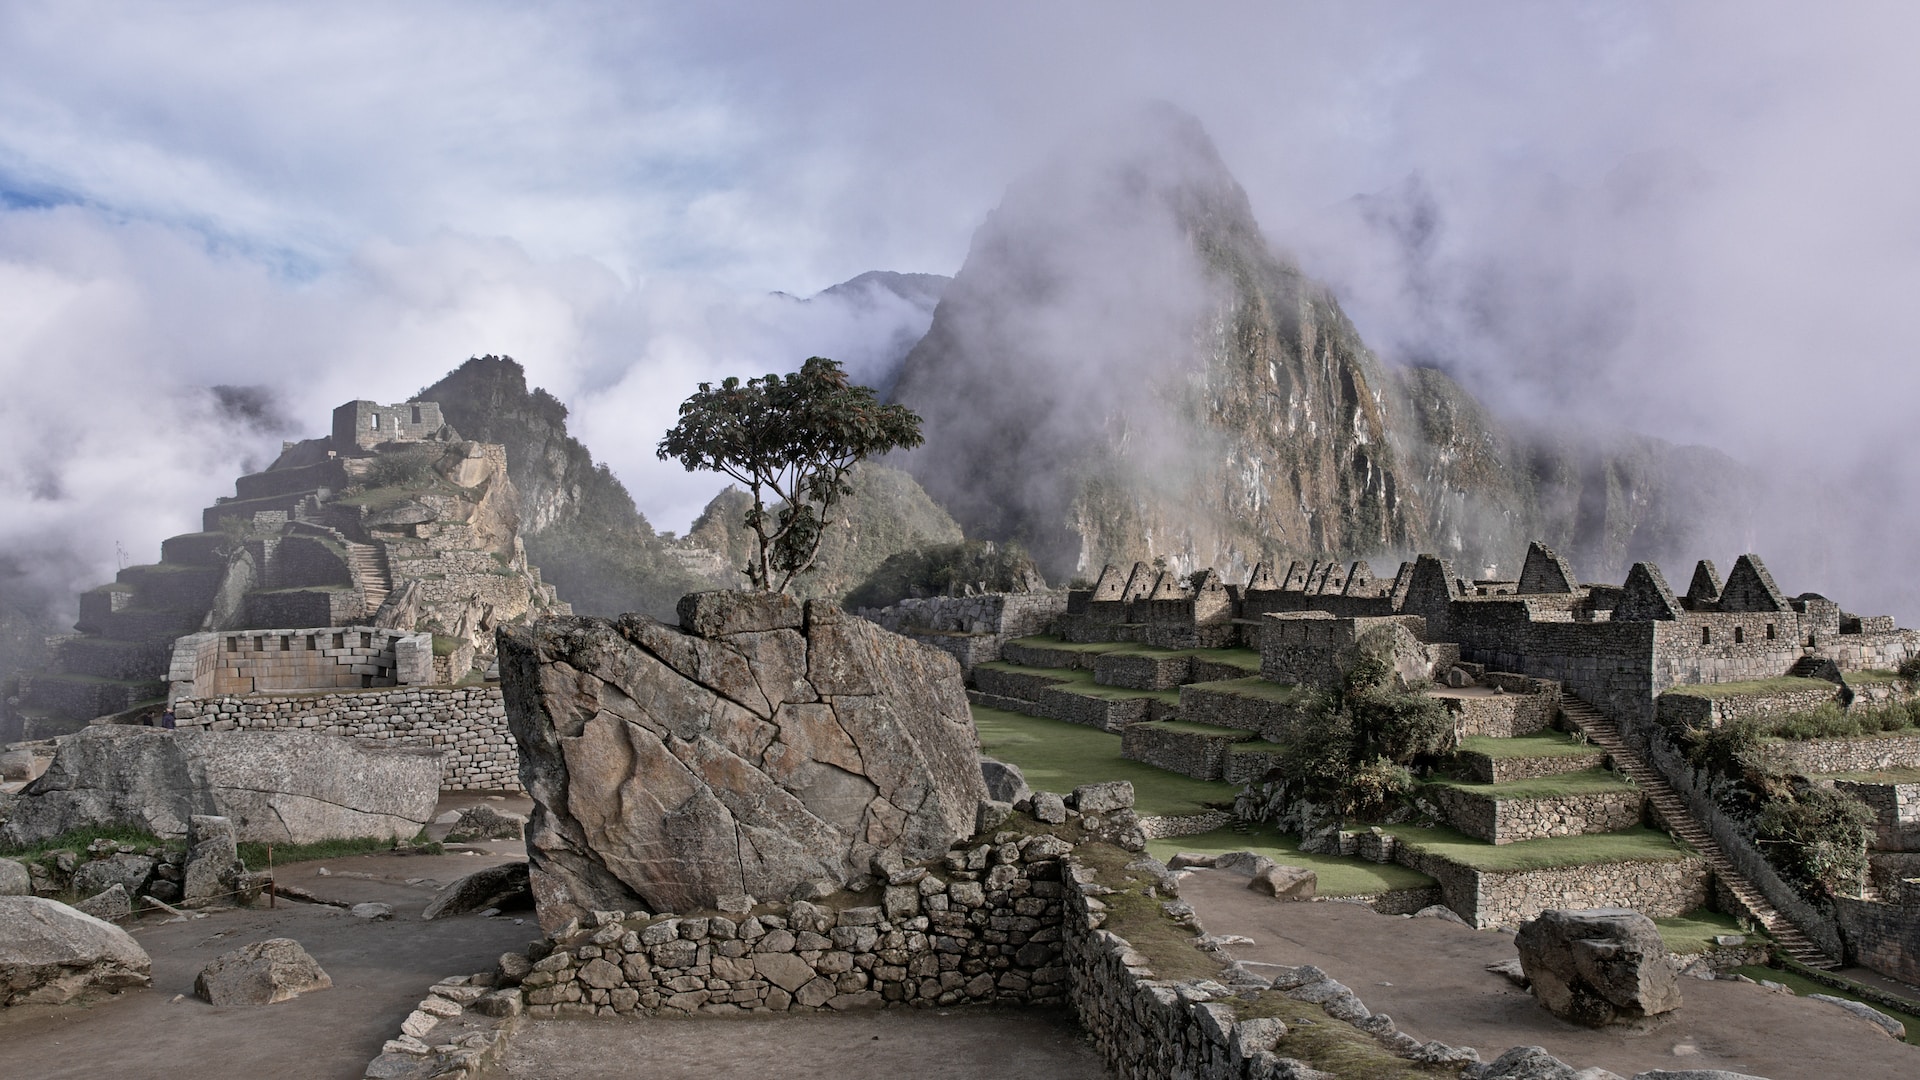 The fascinating history of Peru’s rise as an astronomical superpower